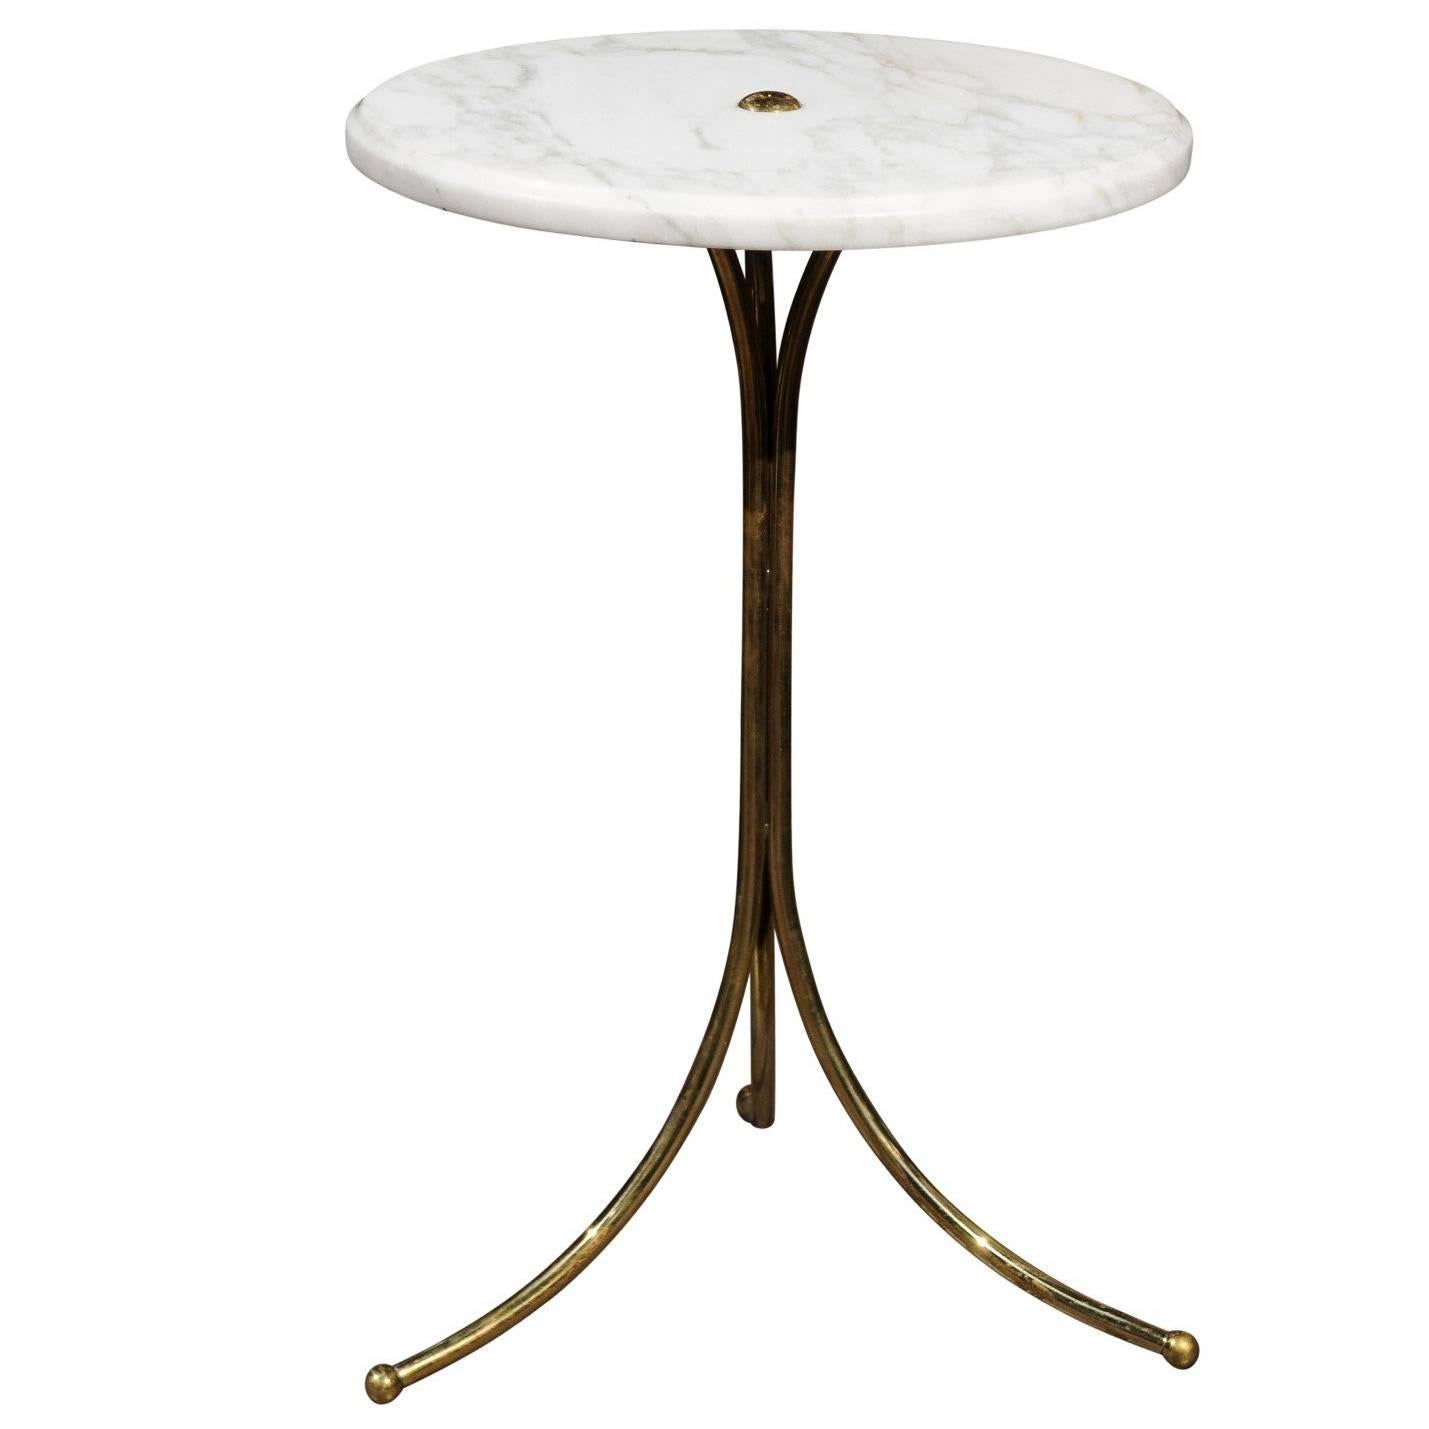 Italian Vintage Round Drinks Table with White Marble Top and Brass Pedestal Base